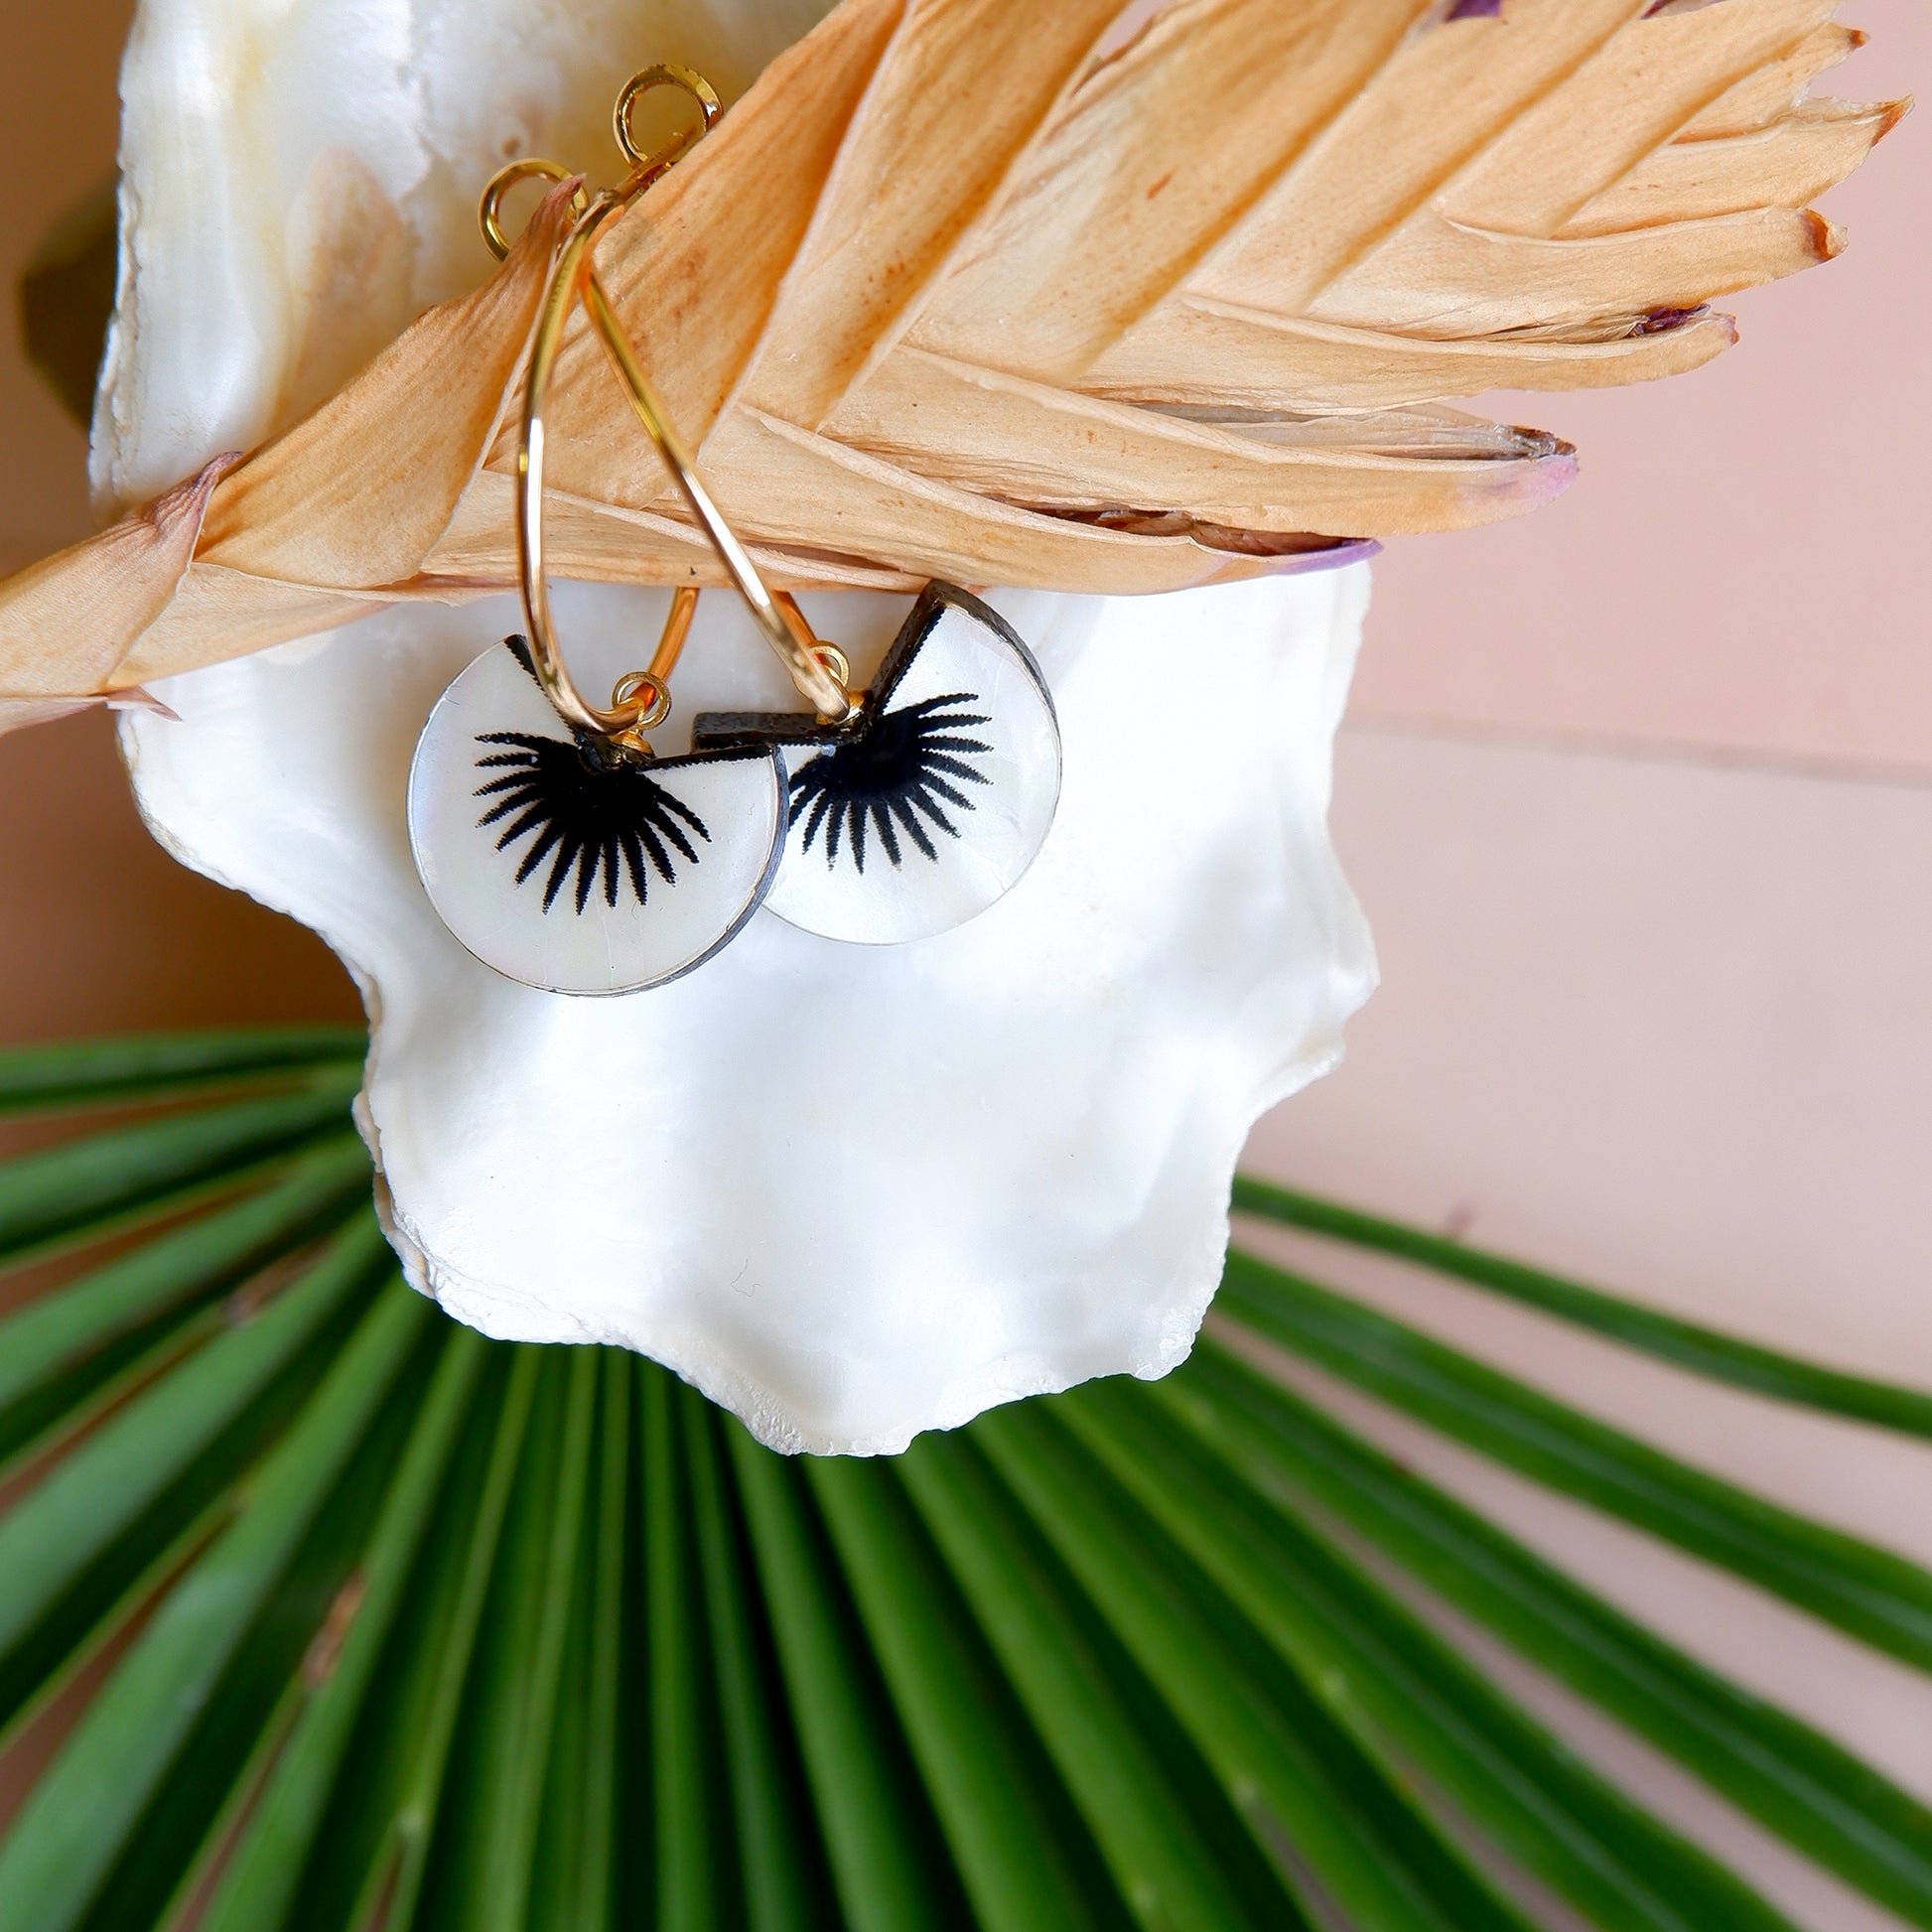 graphic black & mother of pearl spiky palm leaf design pendants on gold hoop earrings, lifestyle shot with oyster shell & palm leaf